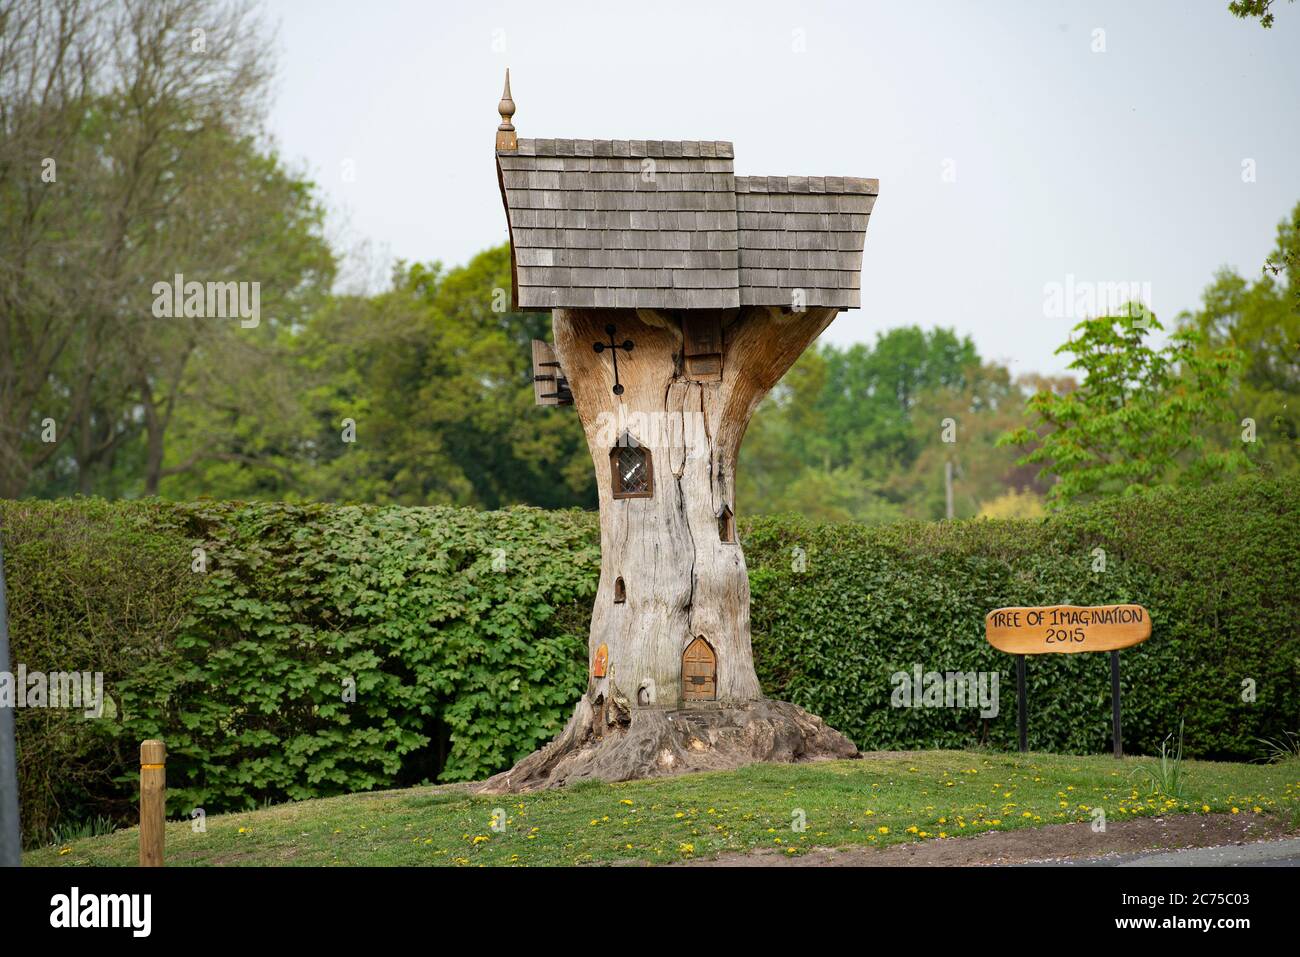 The Tree of Imagination, Lower Peover, Knutsford,. Cheshire. Stock Photo